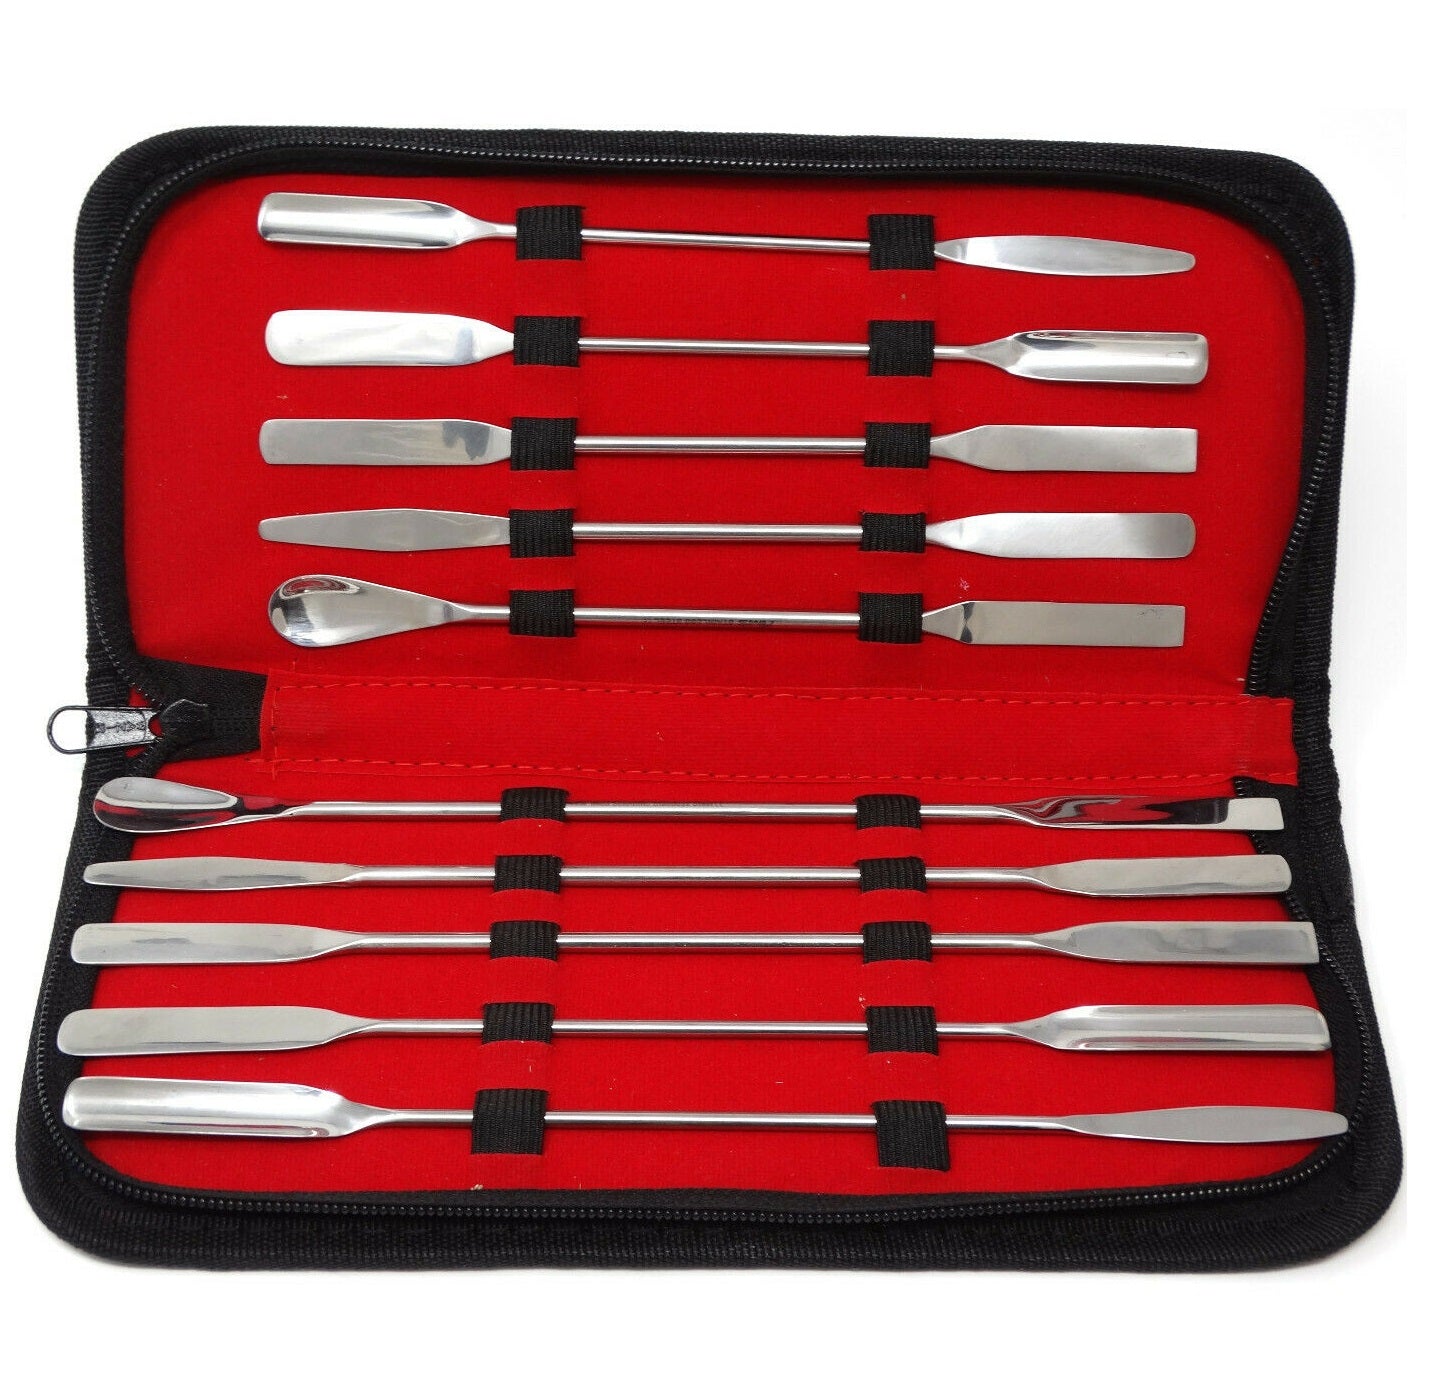 Stainless Steel Lab Spatula Set in a Carrying Case - 10 Pcs Edition